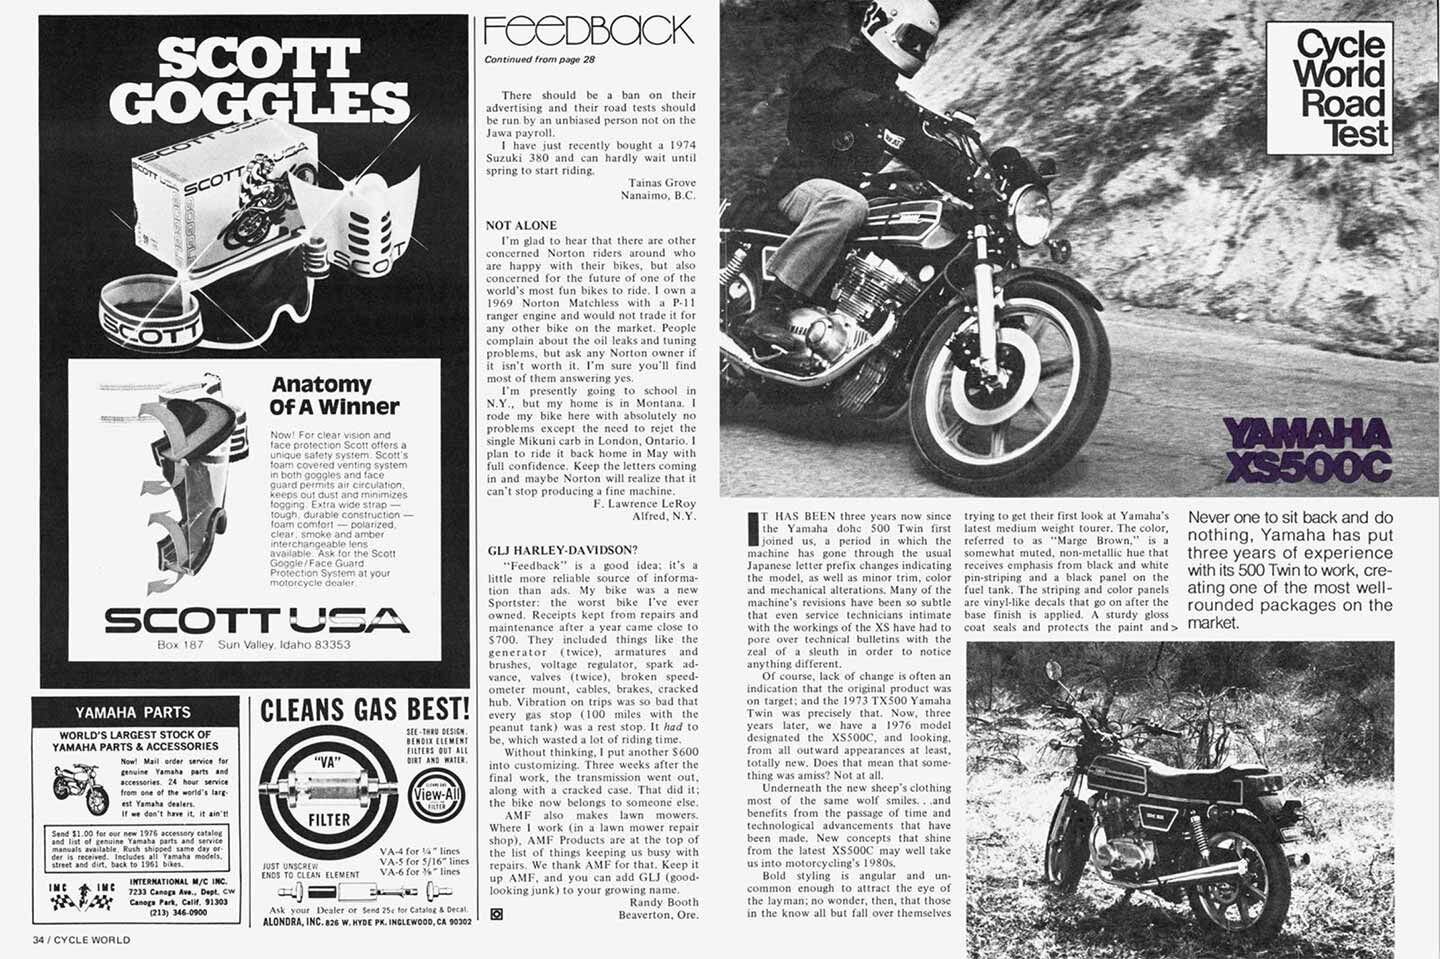 <i>Cycle World</i> review from 1976 of the Yamaha XS500C. They liked it. But present-day <i>Motorcyclist</i> readers beg to differ.